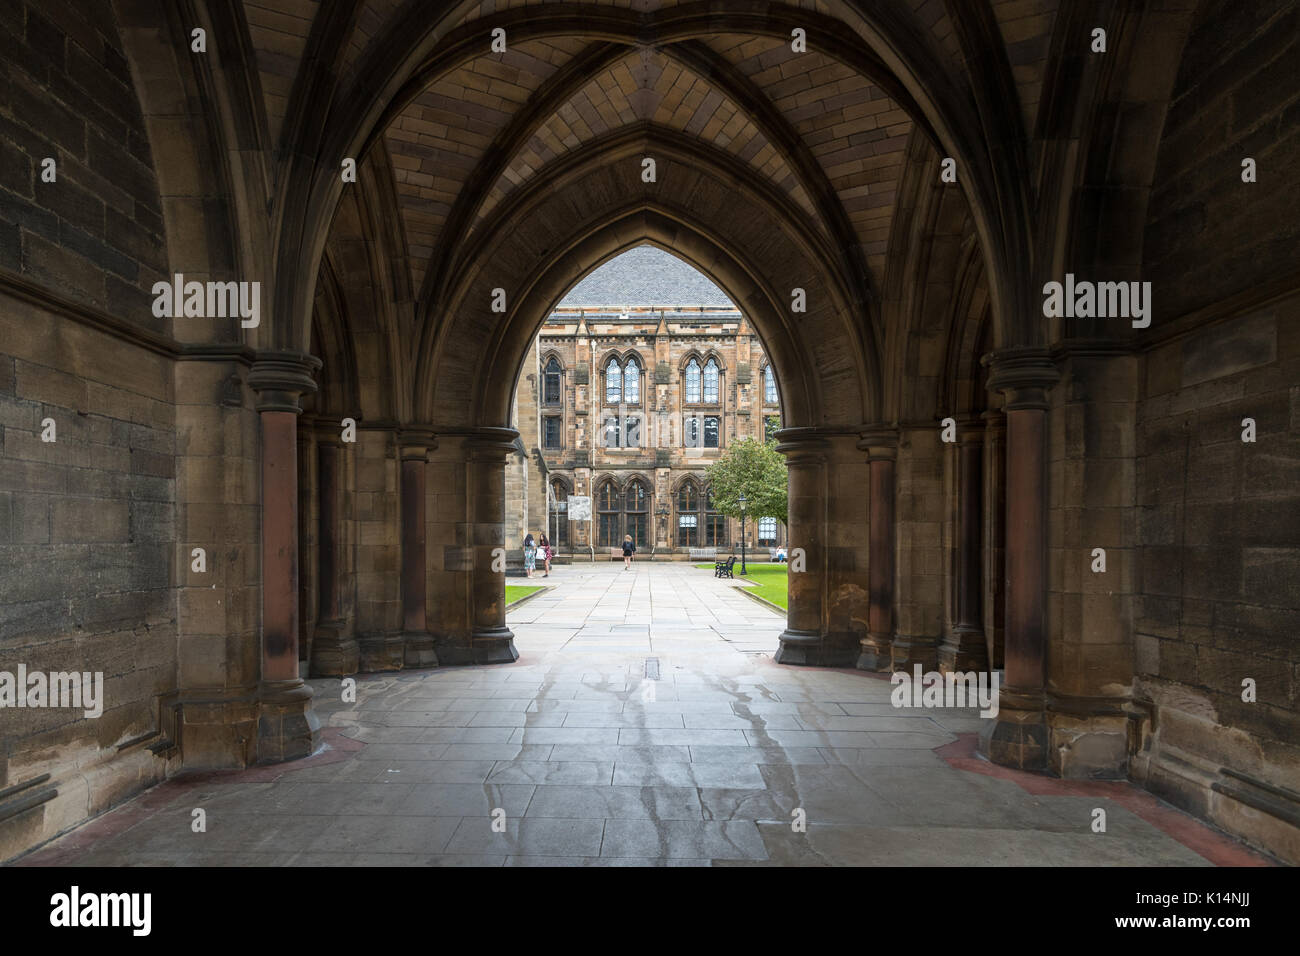 Entrance Into The Courtyard Of The University Of Glasgow Stock Photo